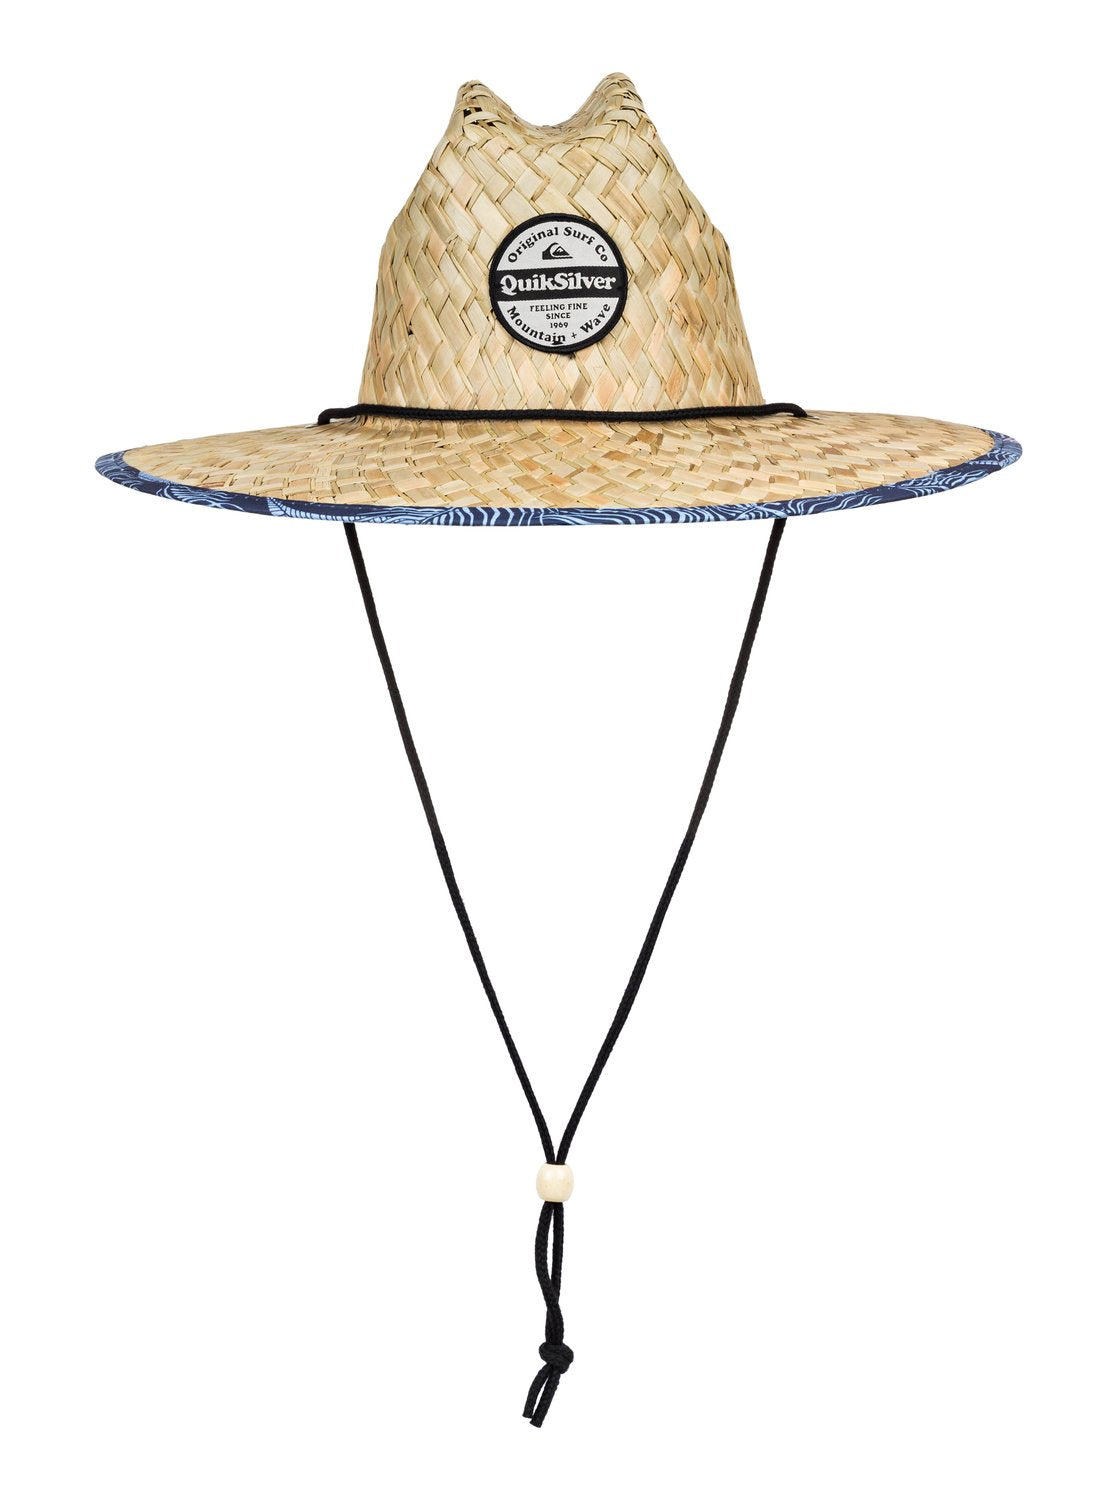 Quiksilver Outsider Straw Mens Hat